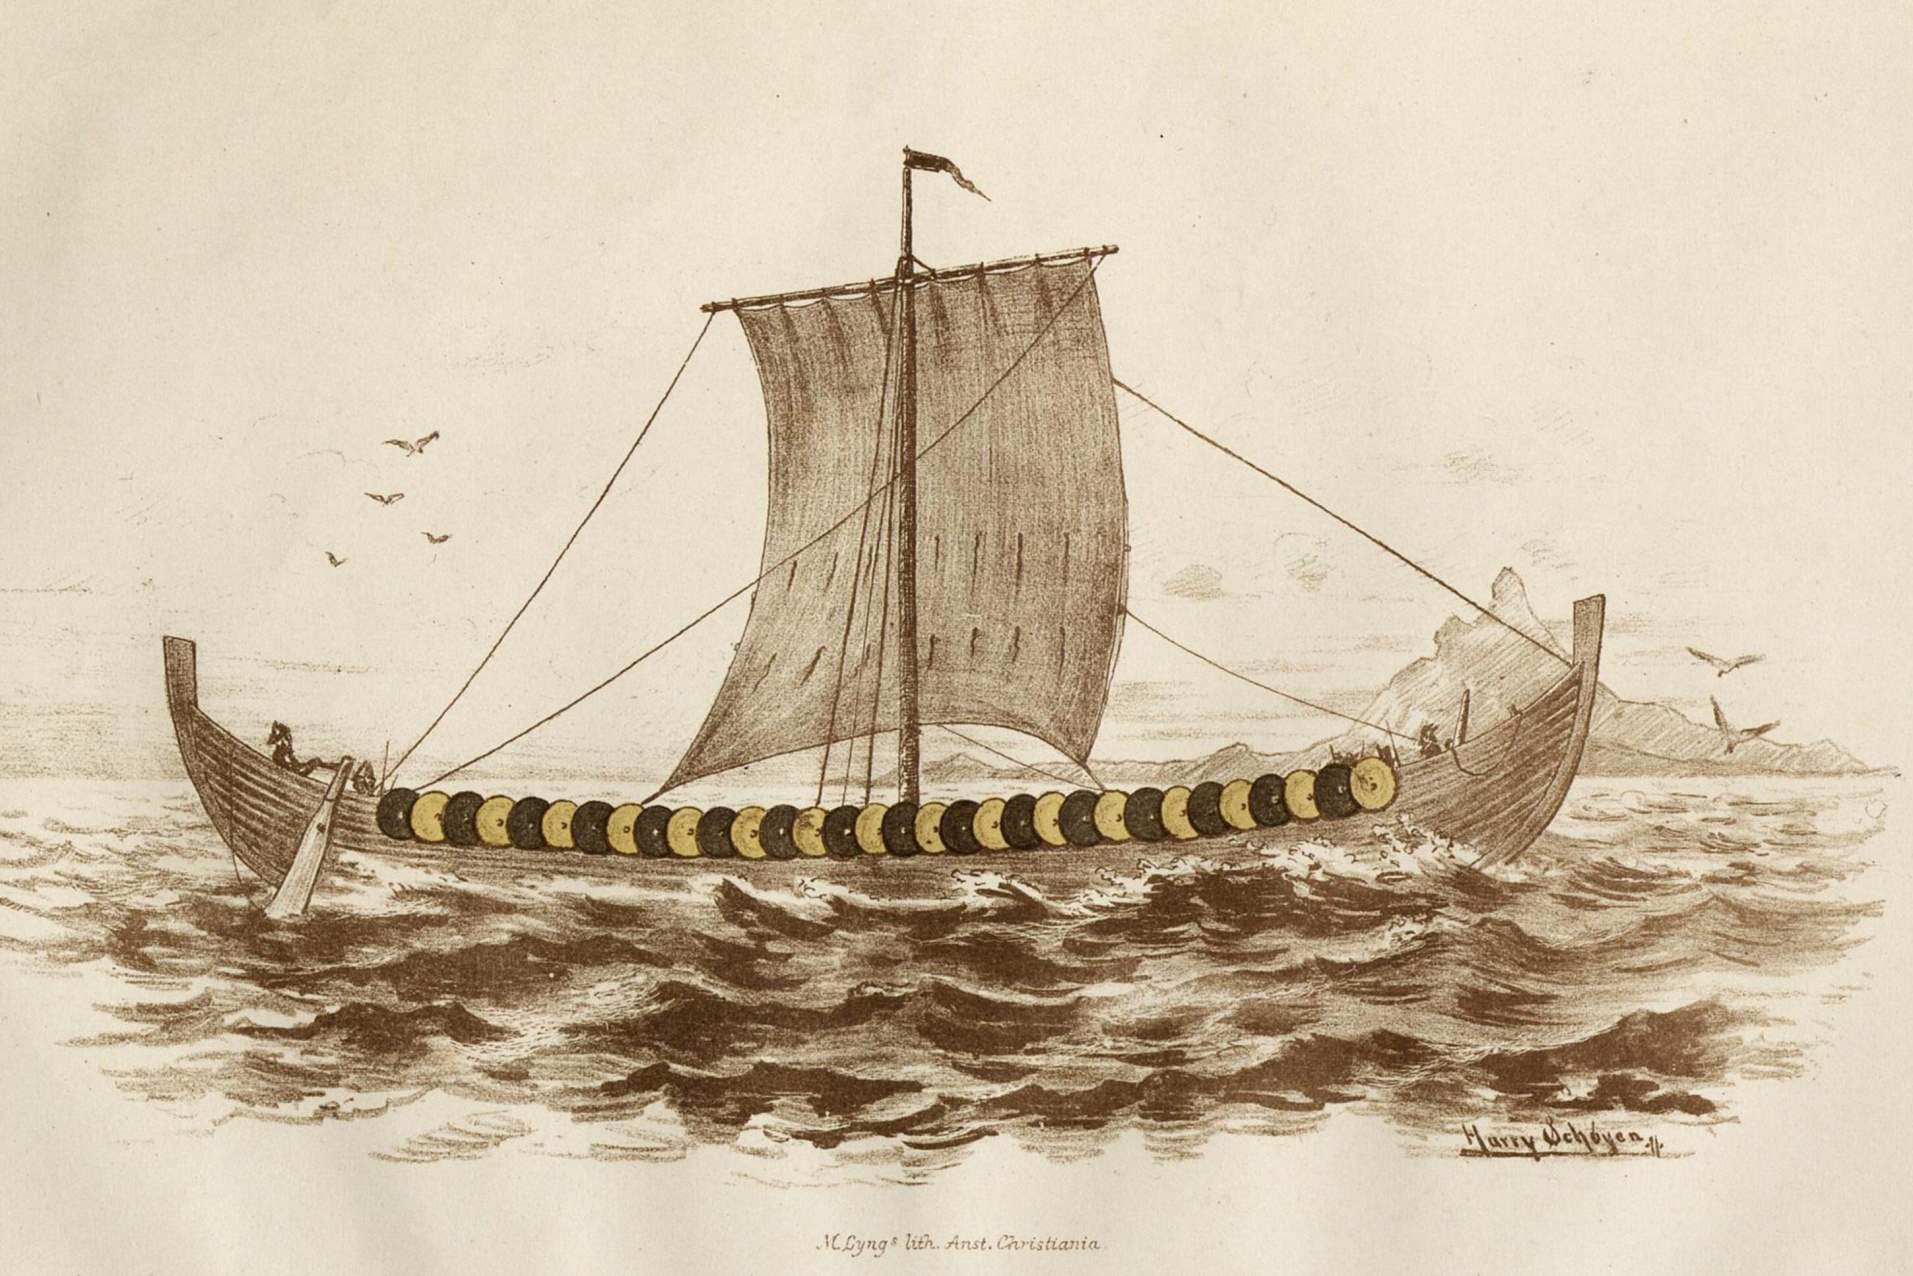 A reconstructive drawing of the Gokstad long ship from Nicolaysen’s 1882 publication. Drawing by Harry Schøyen.